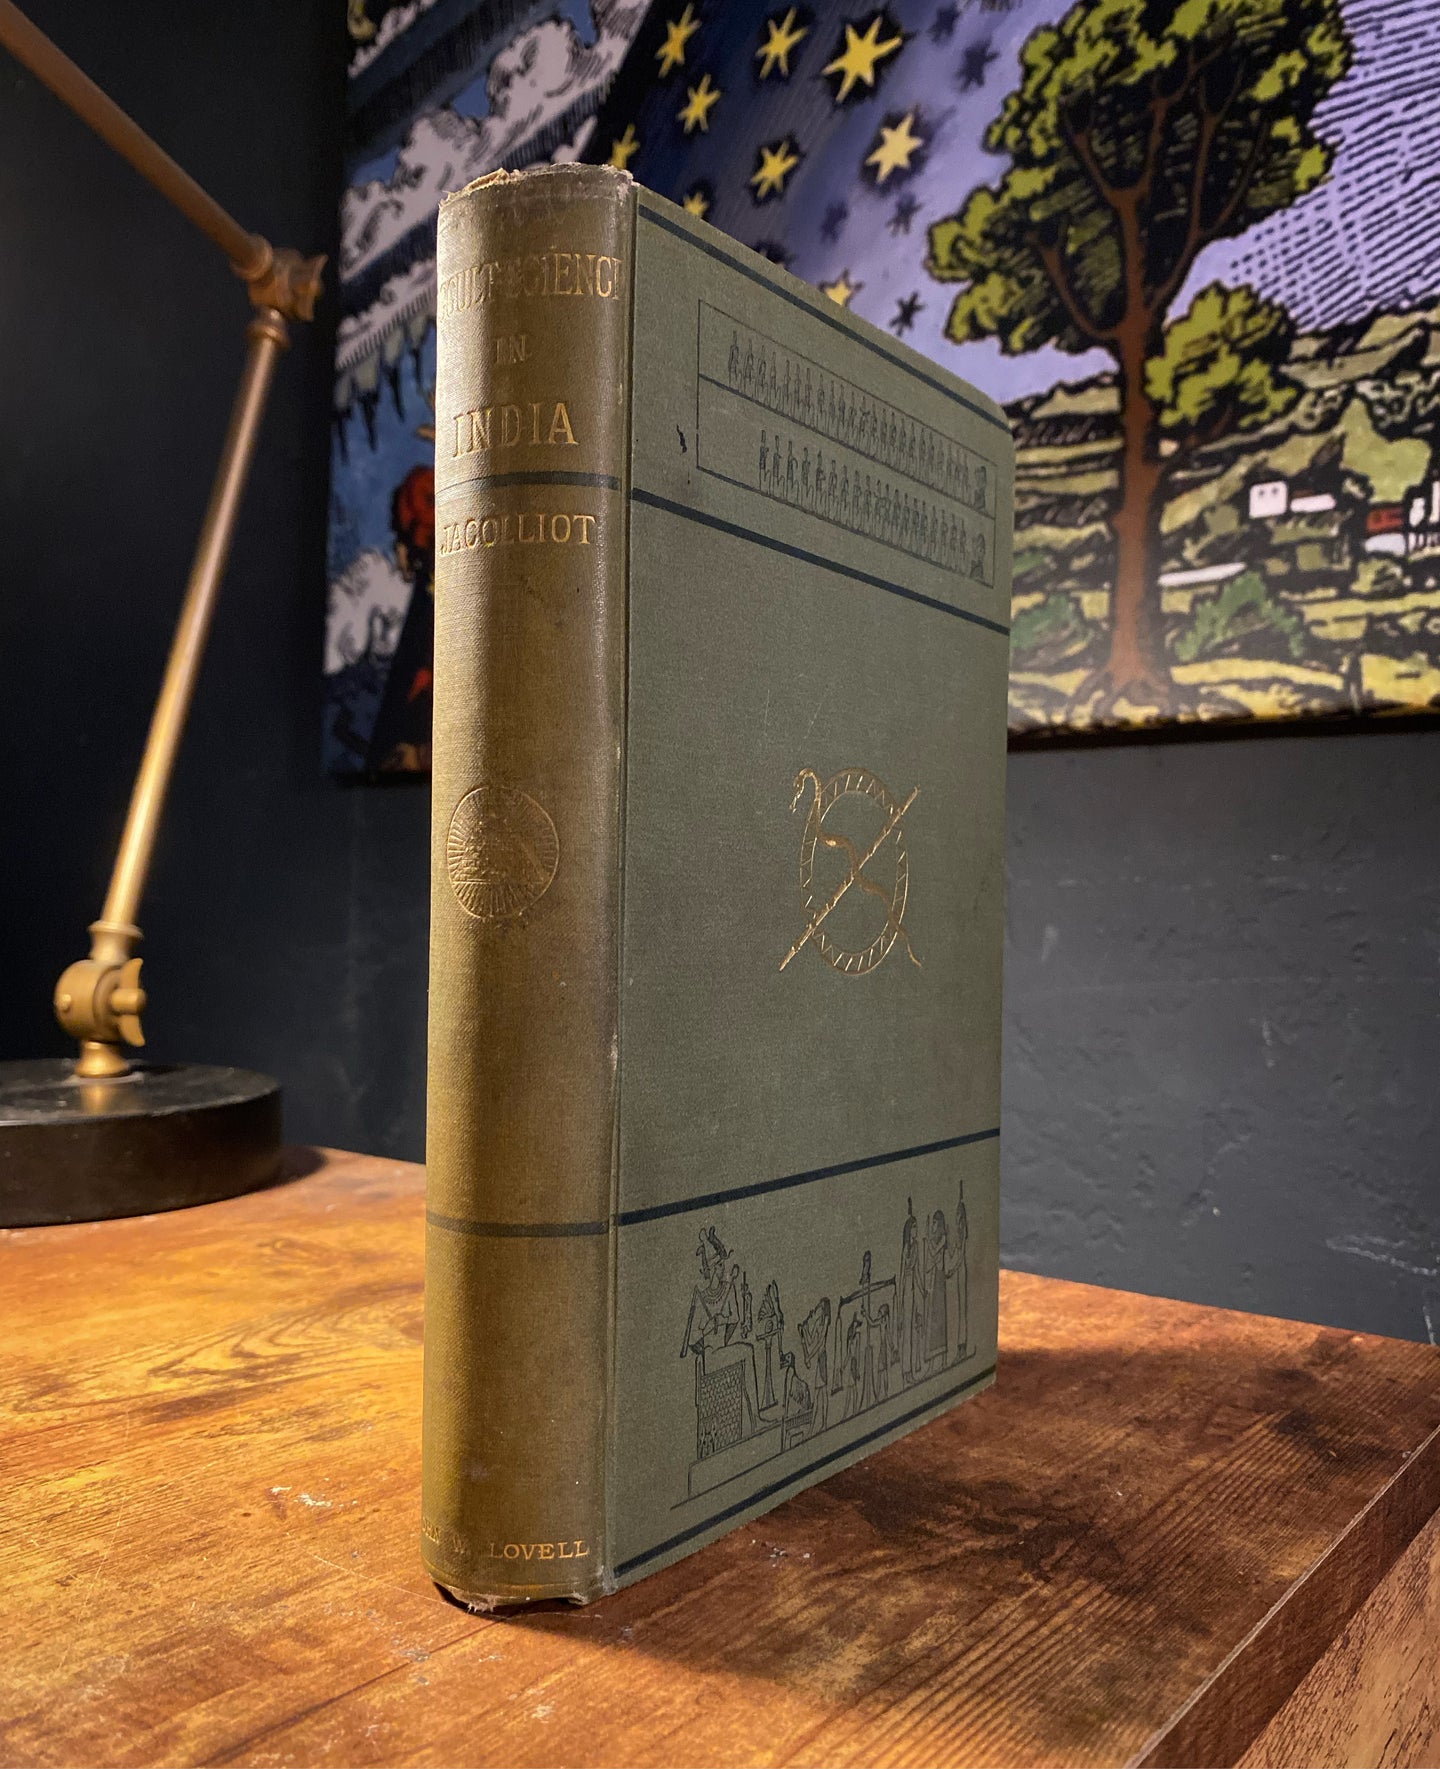 Occult Science in India (1884 First Edition) by Louis Jacoliott